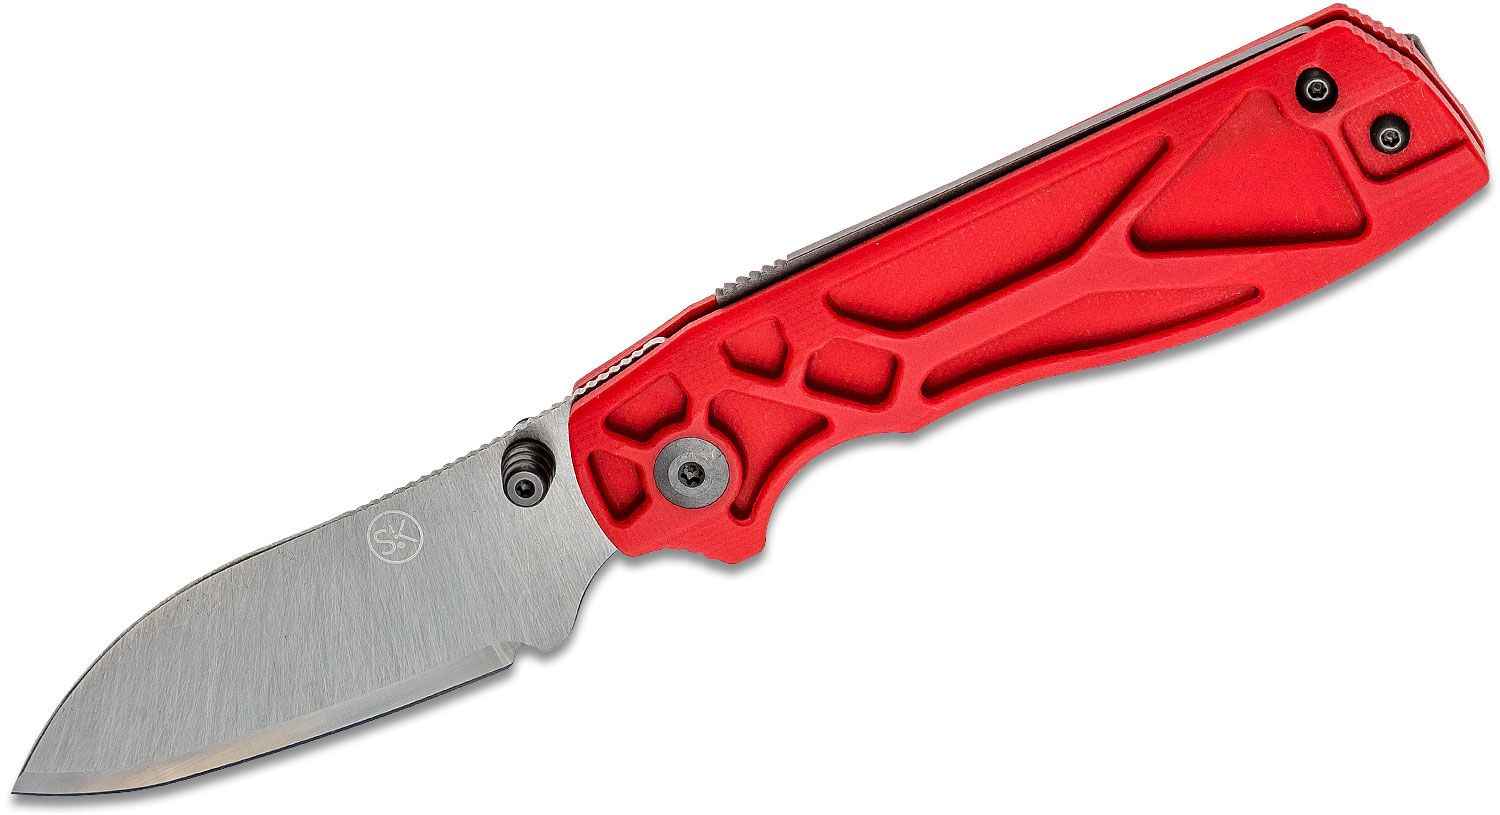 Sandrin Knives Torino Recoil Lock Folding Knife 2.95 Polyhedral Tungsten  Carbide Raw Sheepsfoot Blade, Milled Red G10 Handles - KnifeCenter